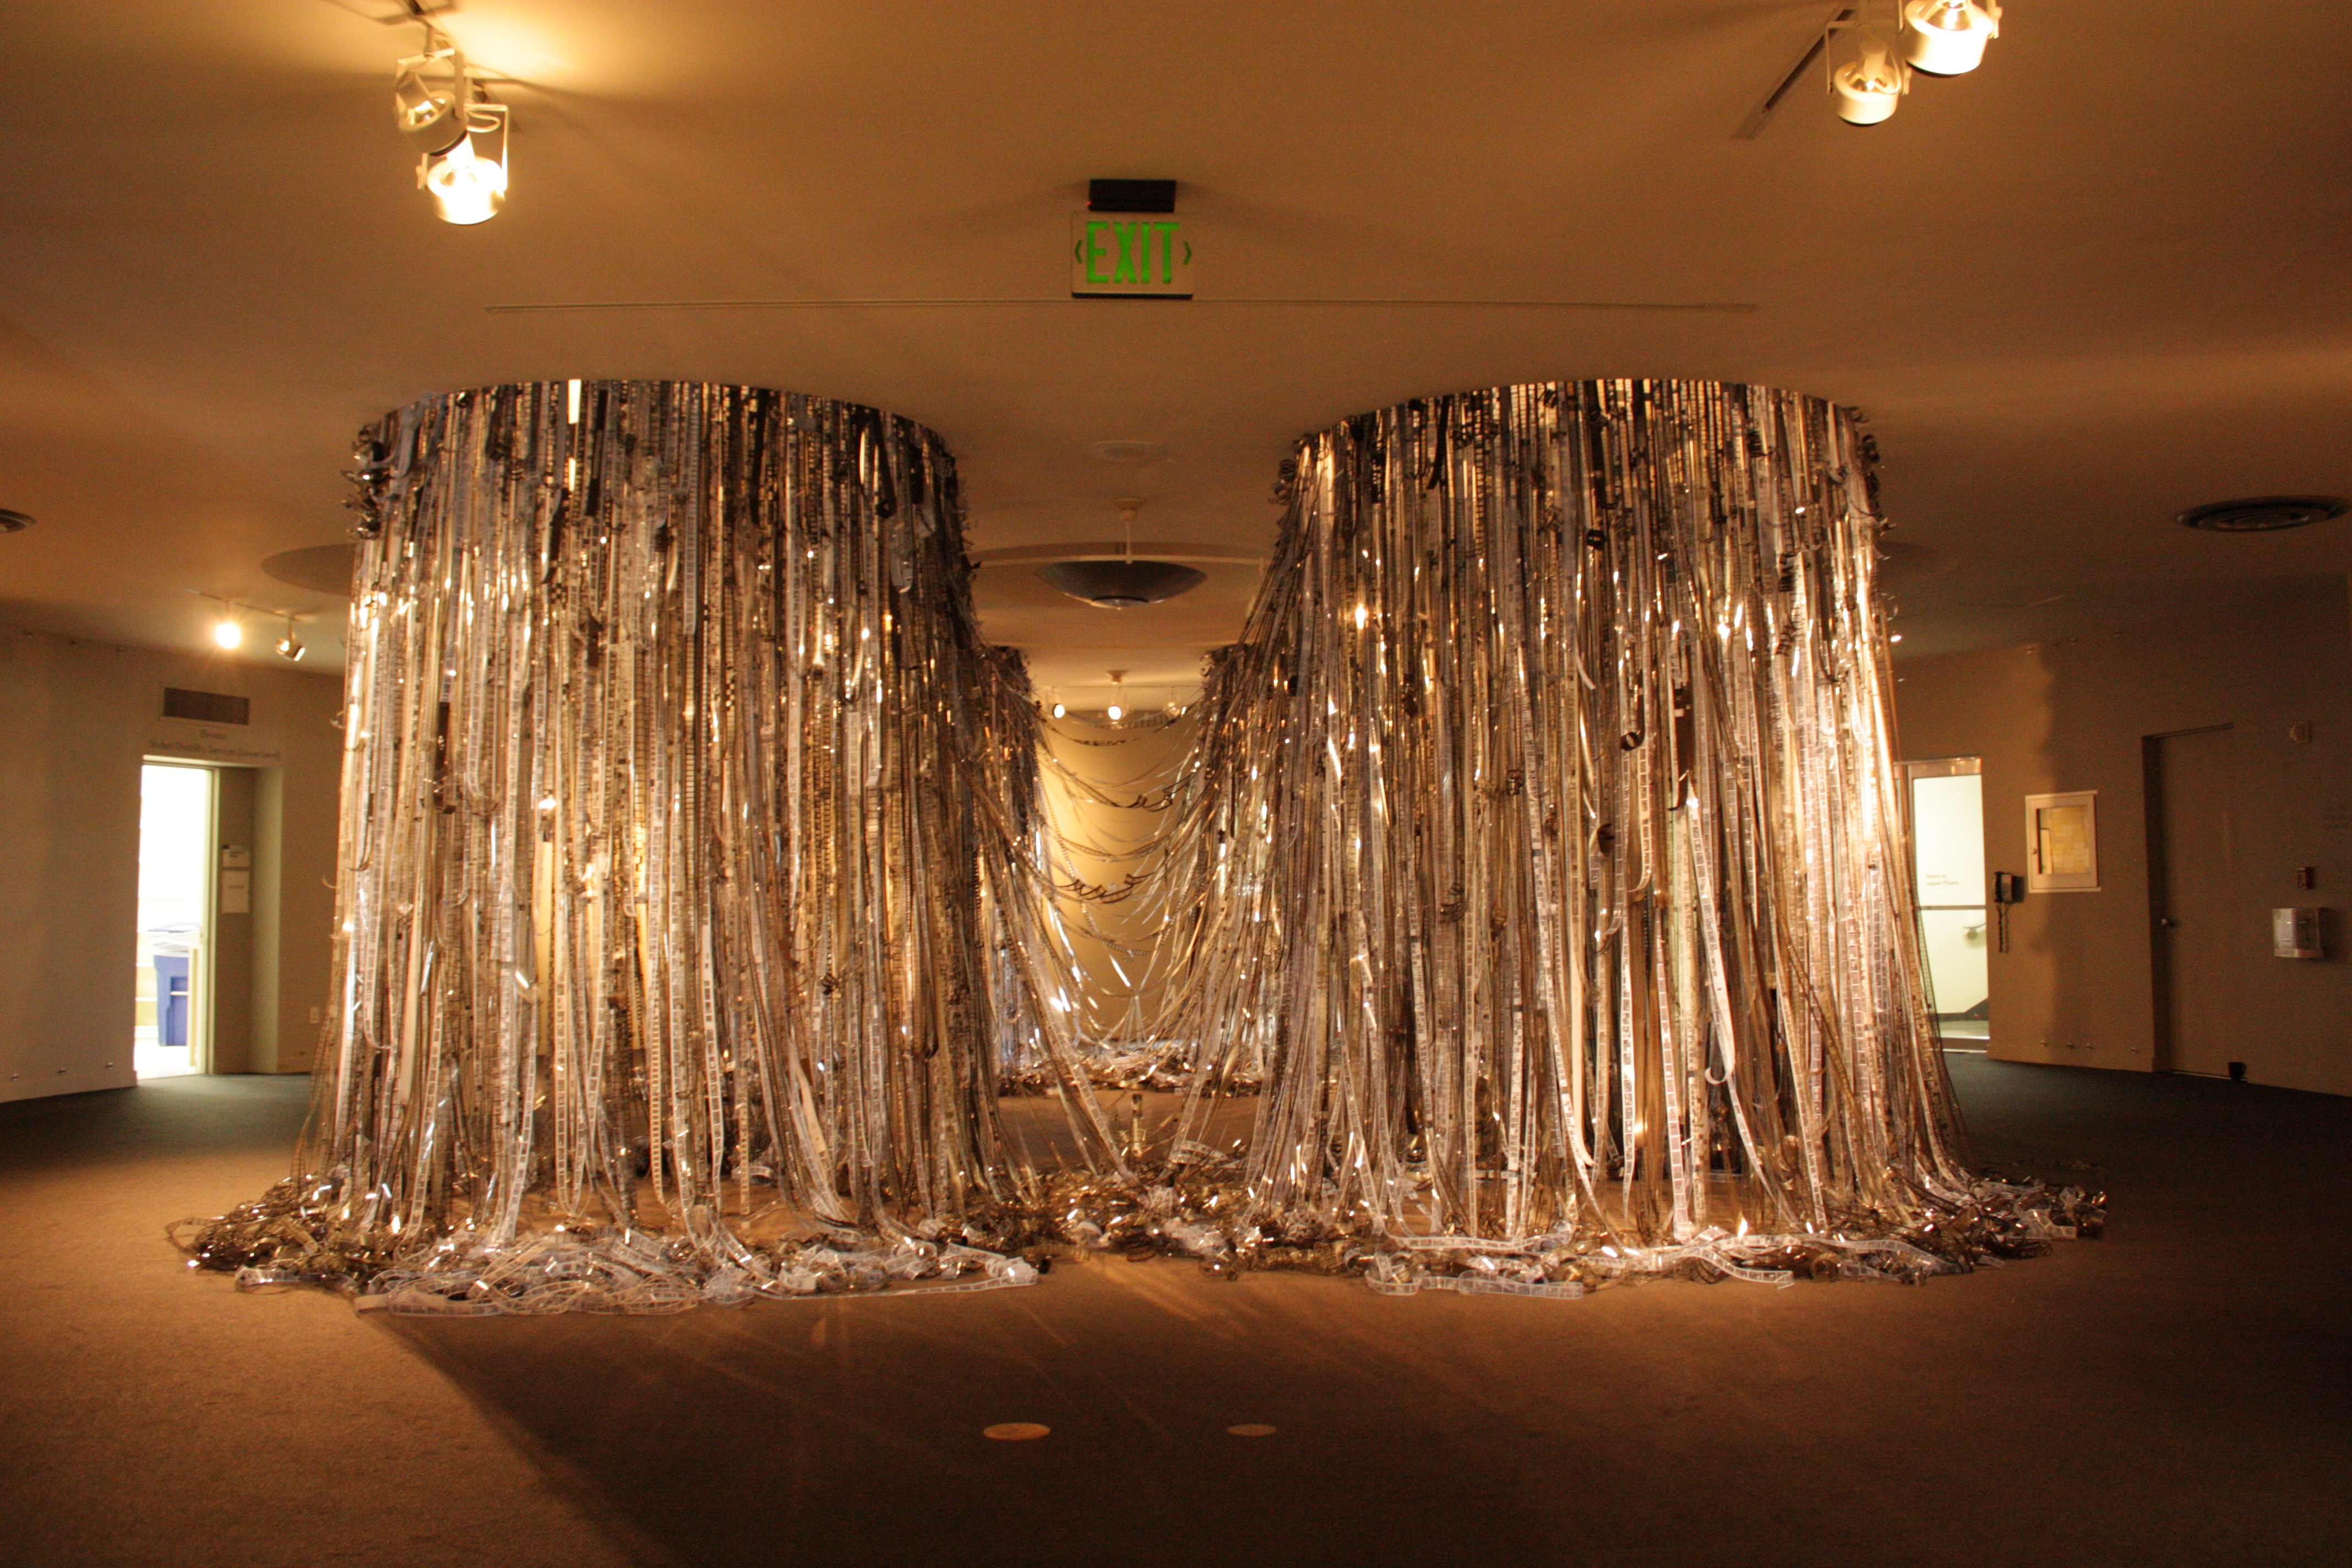 An art installation featuring cascading strands of reflective materials hanging from the ceiling, forming two large, curtain-like structures with light reflecting off their surfaces.